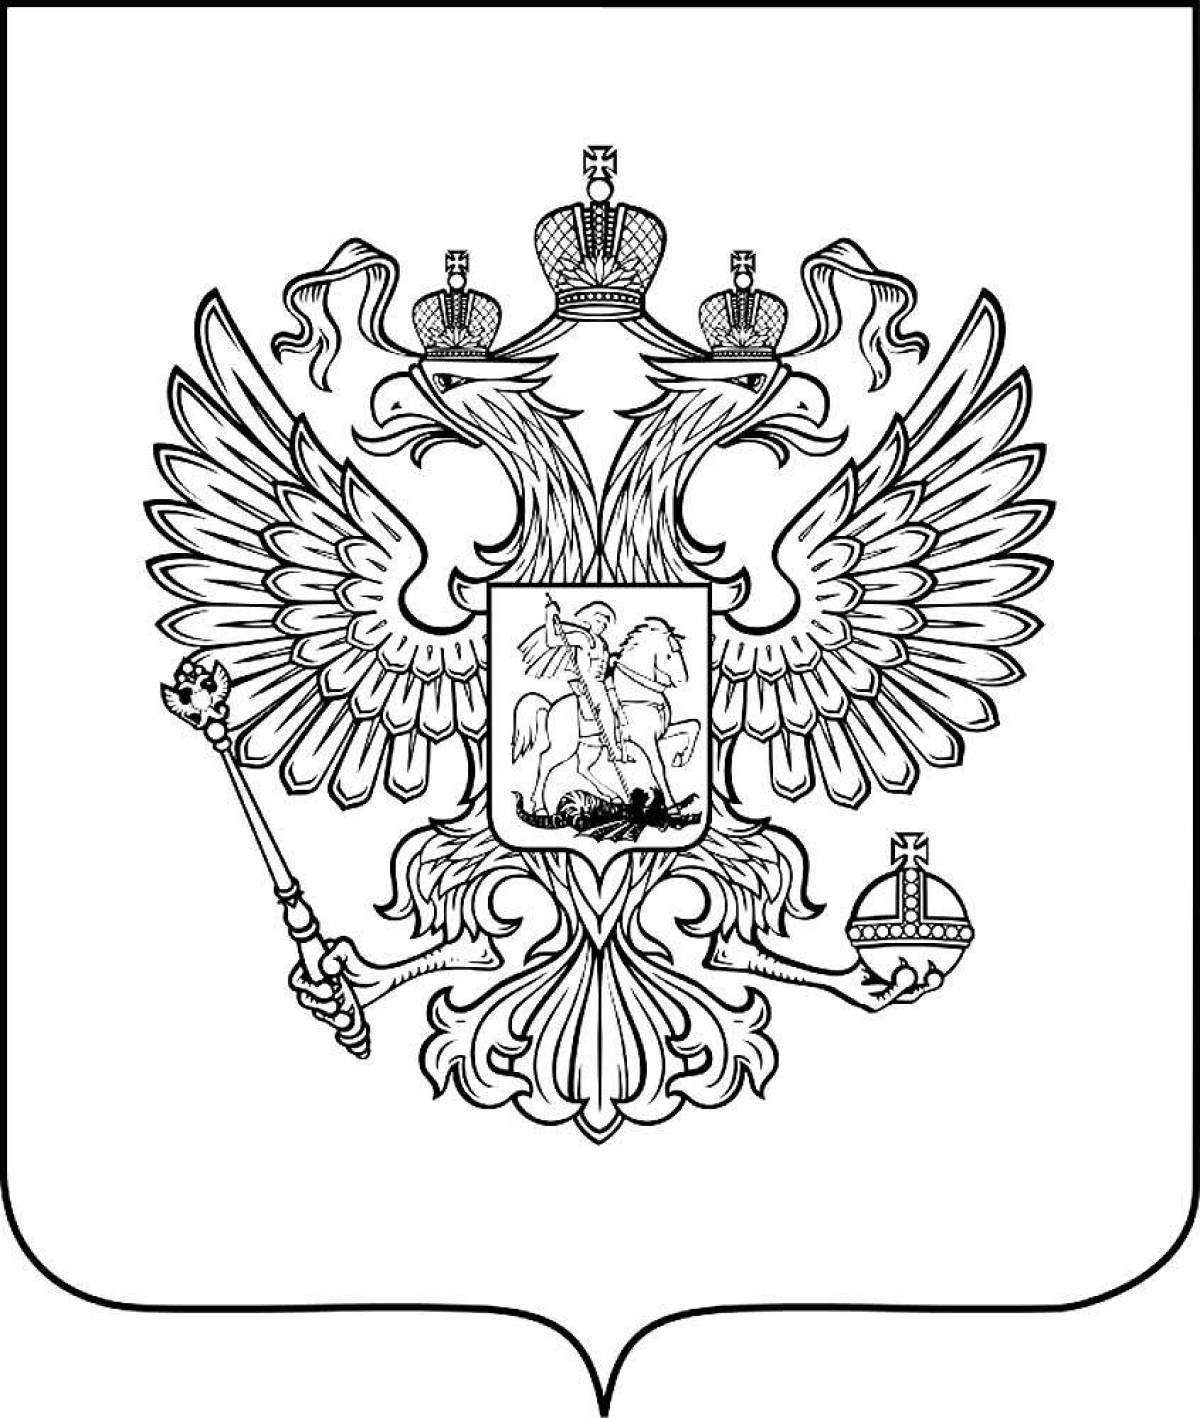 Royal coat of arms of Russia